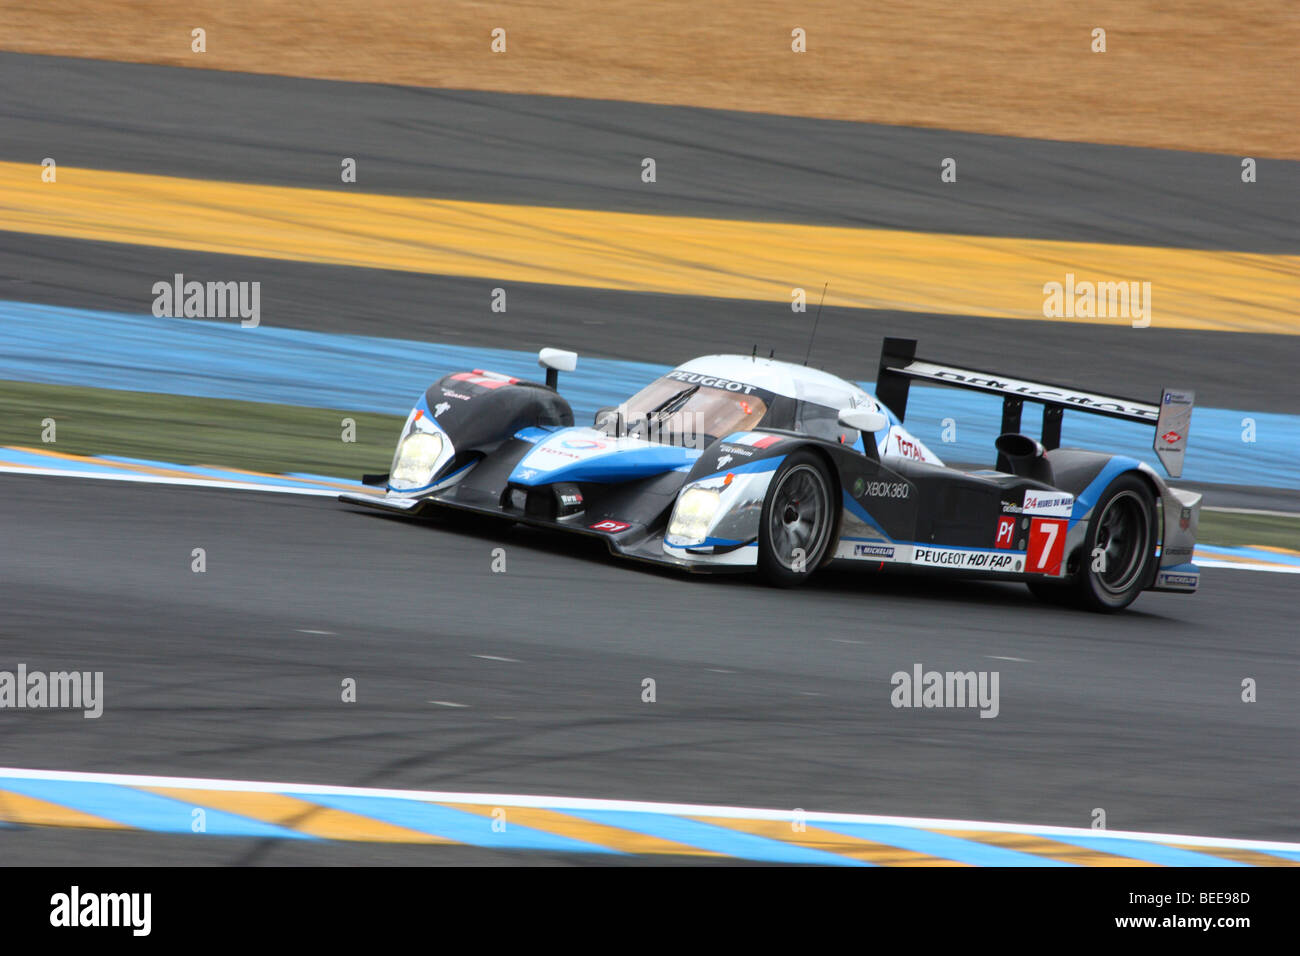 24 hours of Le Mans 2009 - Peugeot 908 HDI N°7 Stock Photo - Alamy